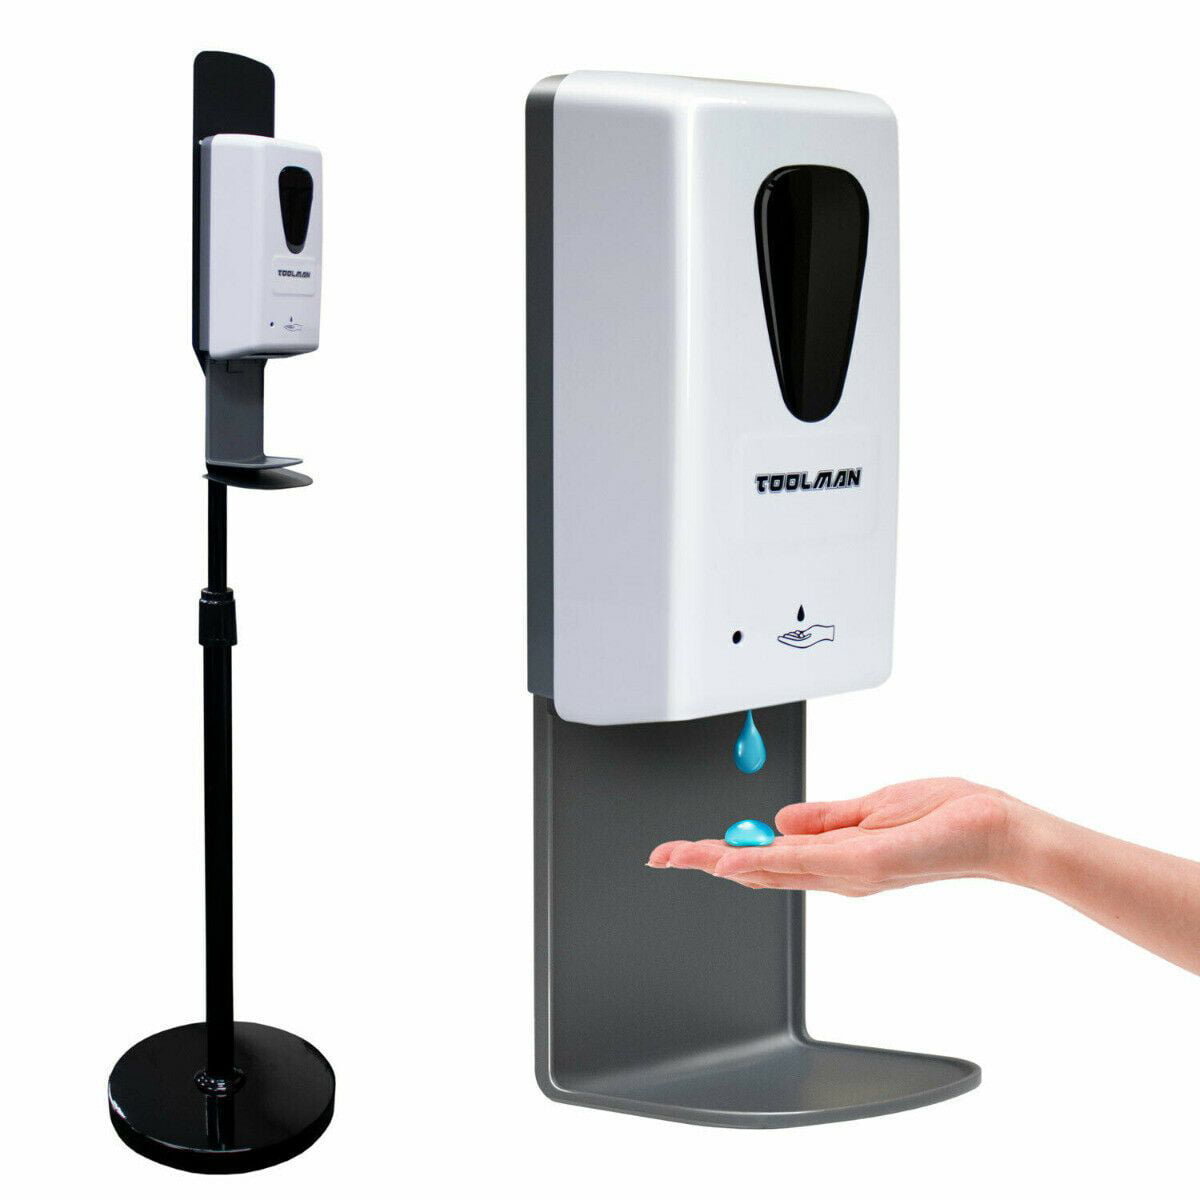 Automatic Hands Free Re-fillable Sanitizer/Soap Dispenser with Stand